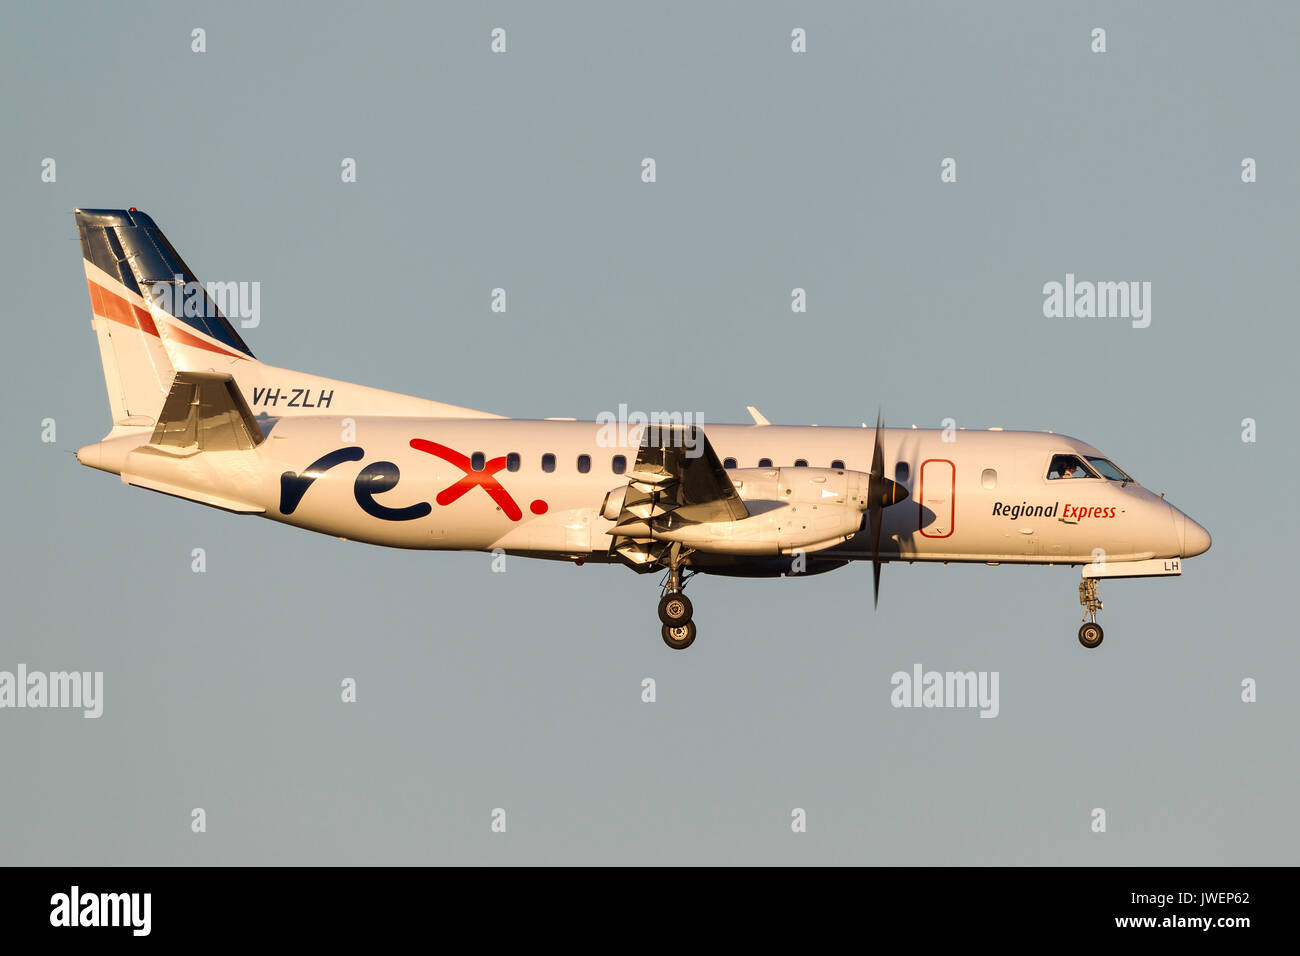 Regional Express (REX) Airlines Saab 340B VH-ZLH on approach to land at Melbourne International Airport. Stock Photo